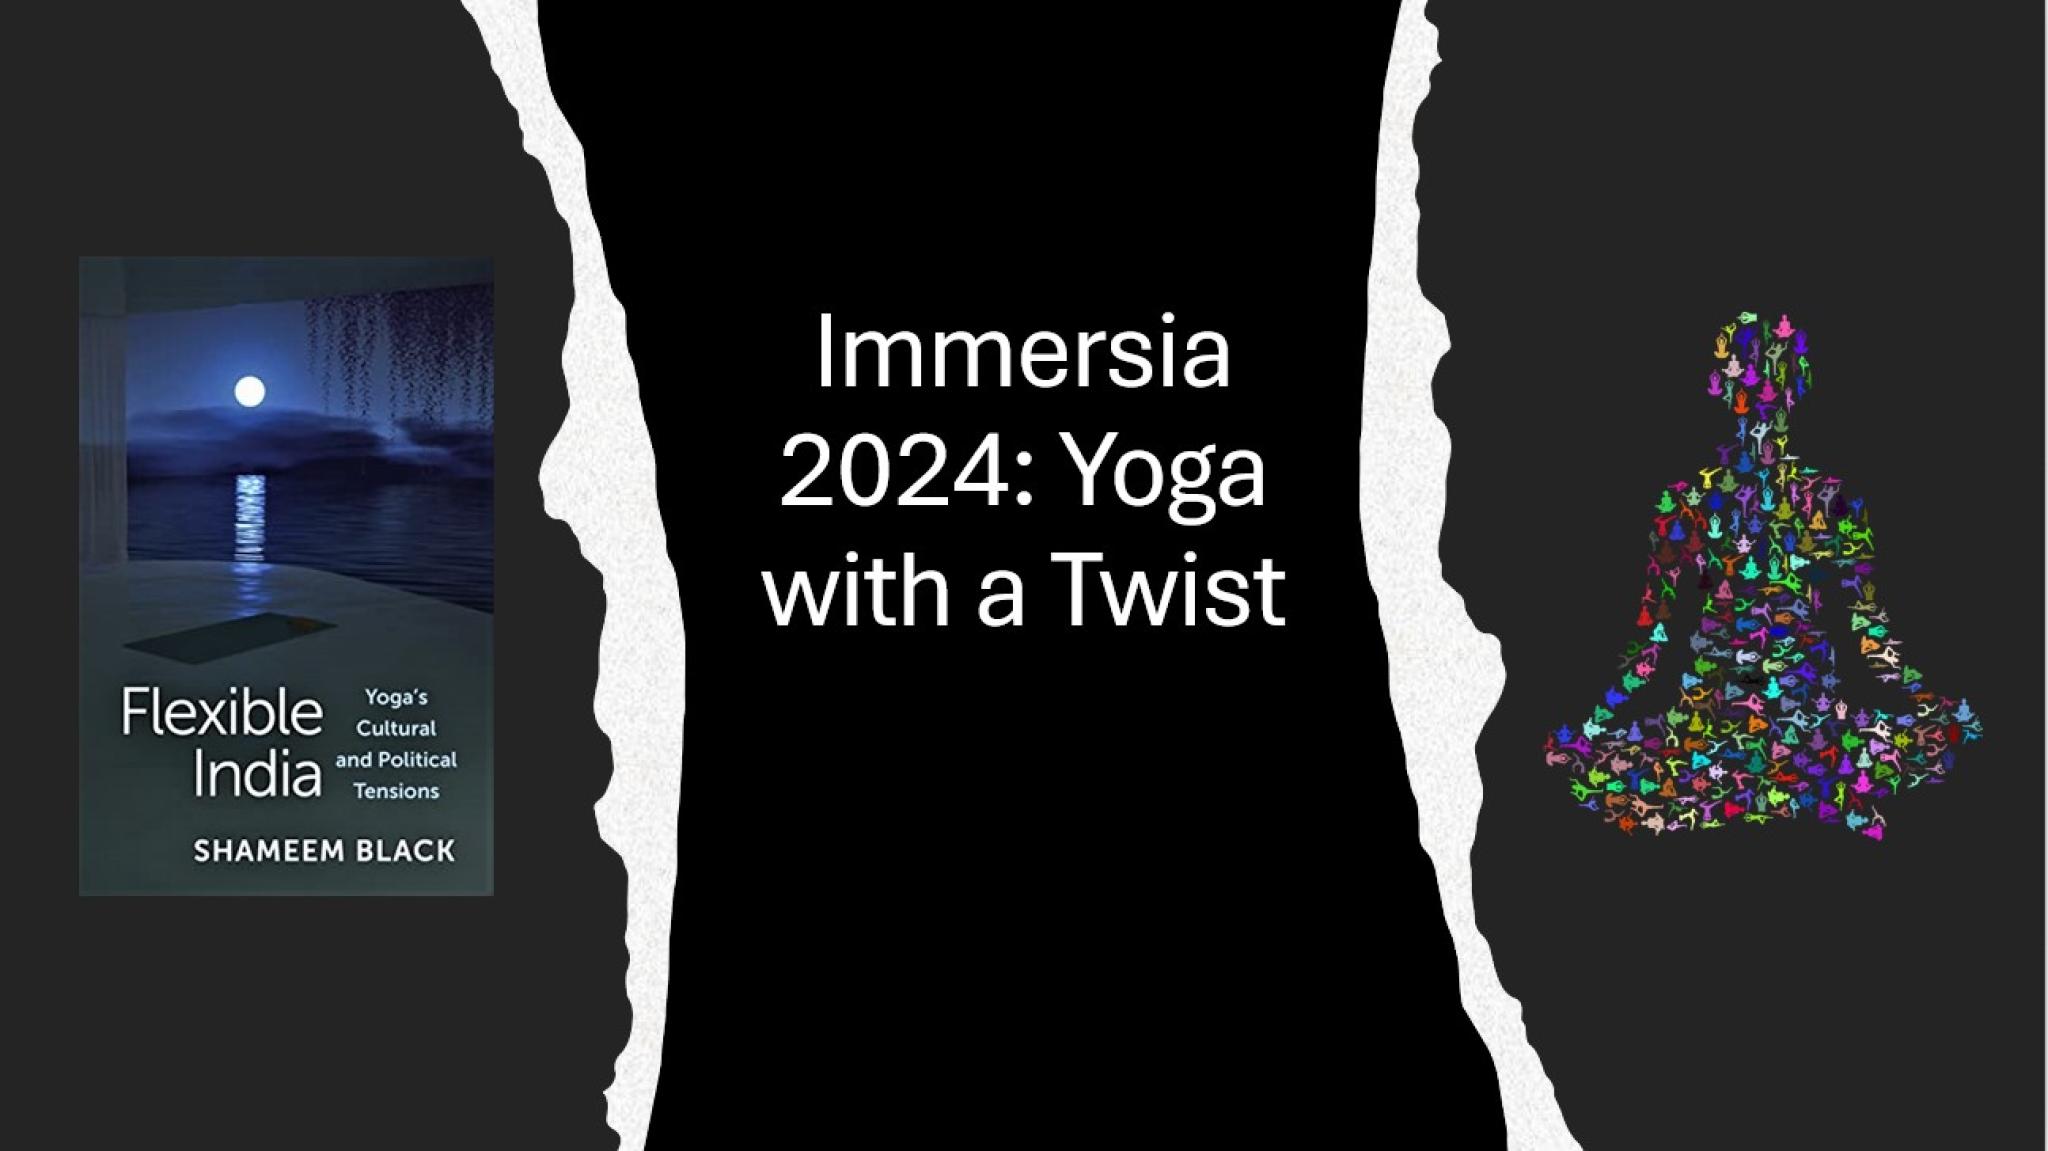 Immersia 2024: Yoga with a Twist